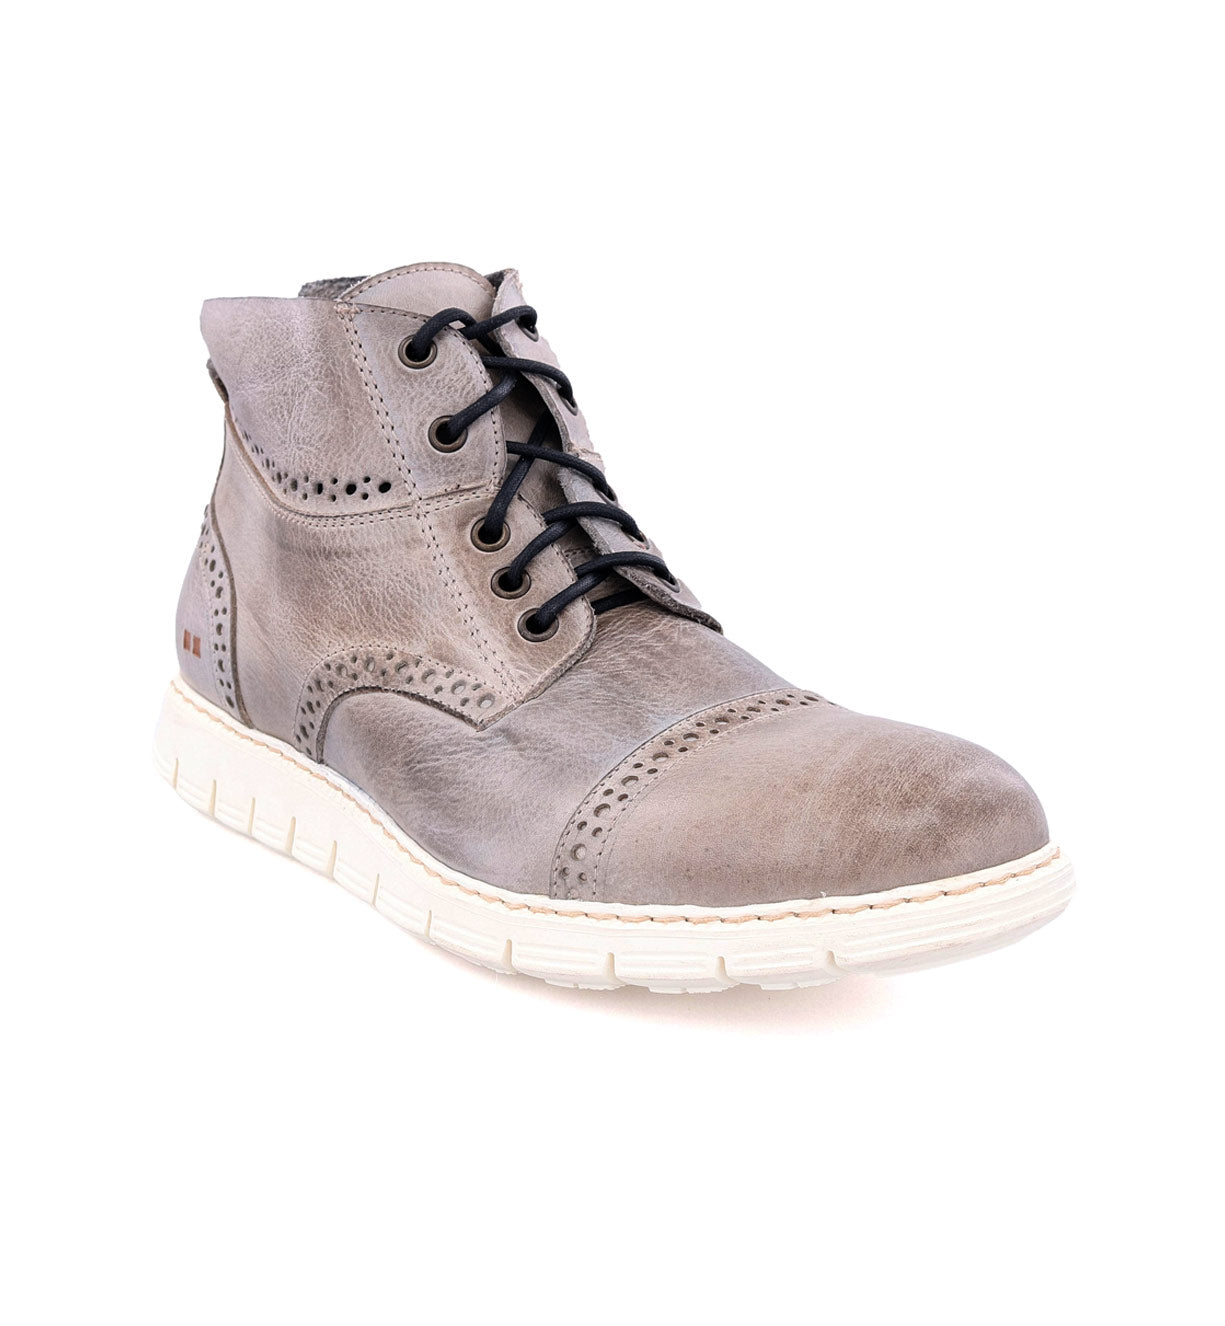 Men's Bowery II leather lace up boots by Bed Stu.